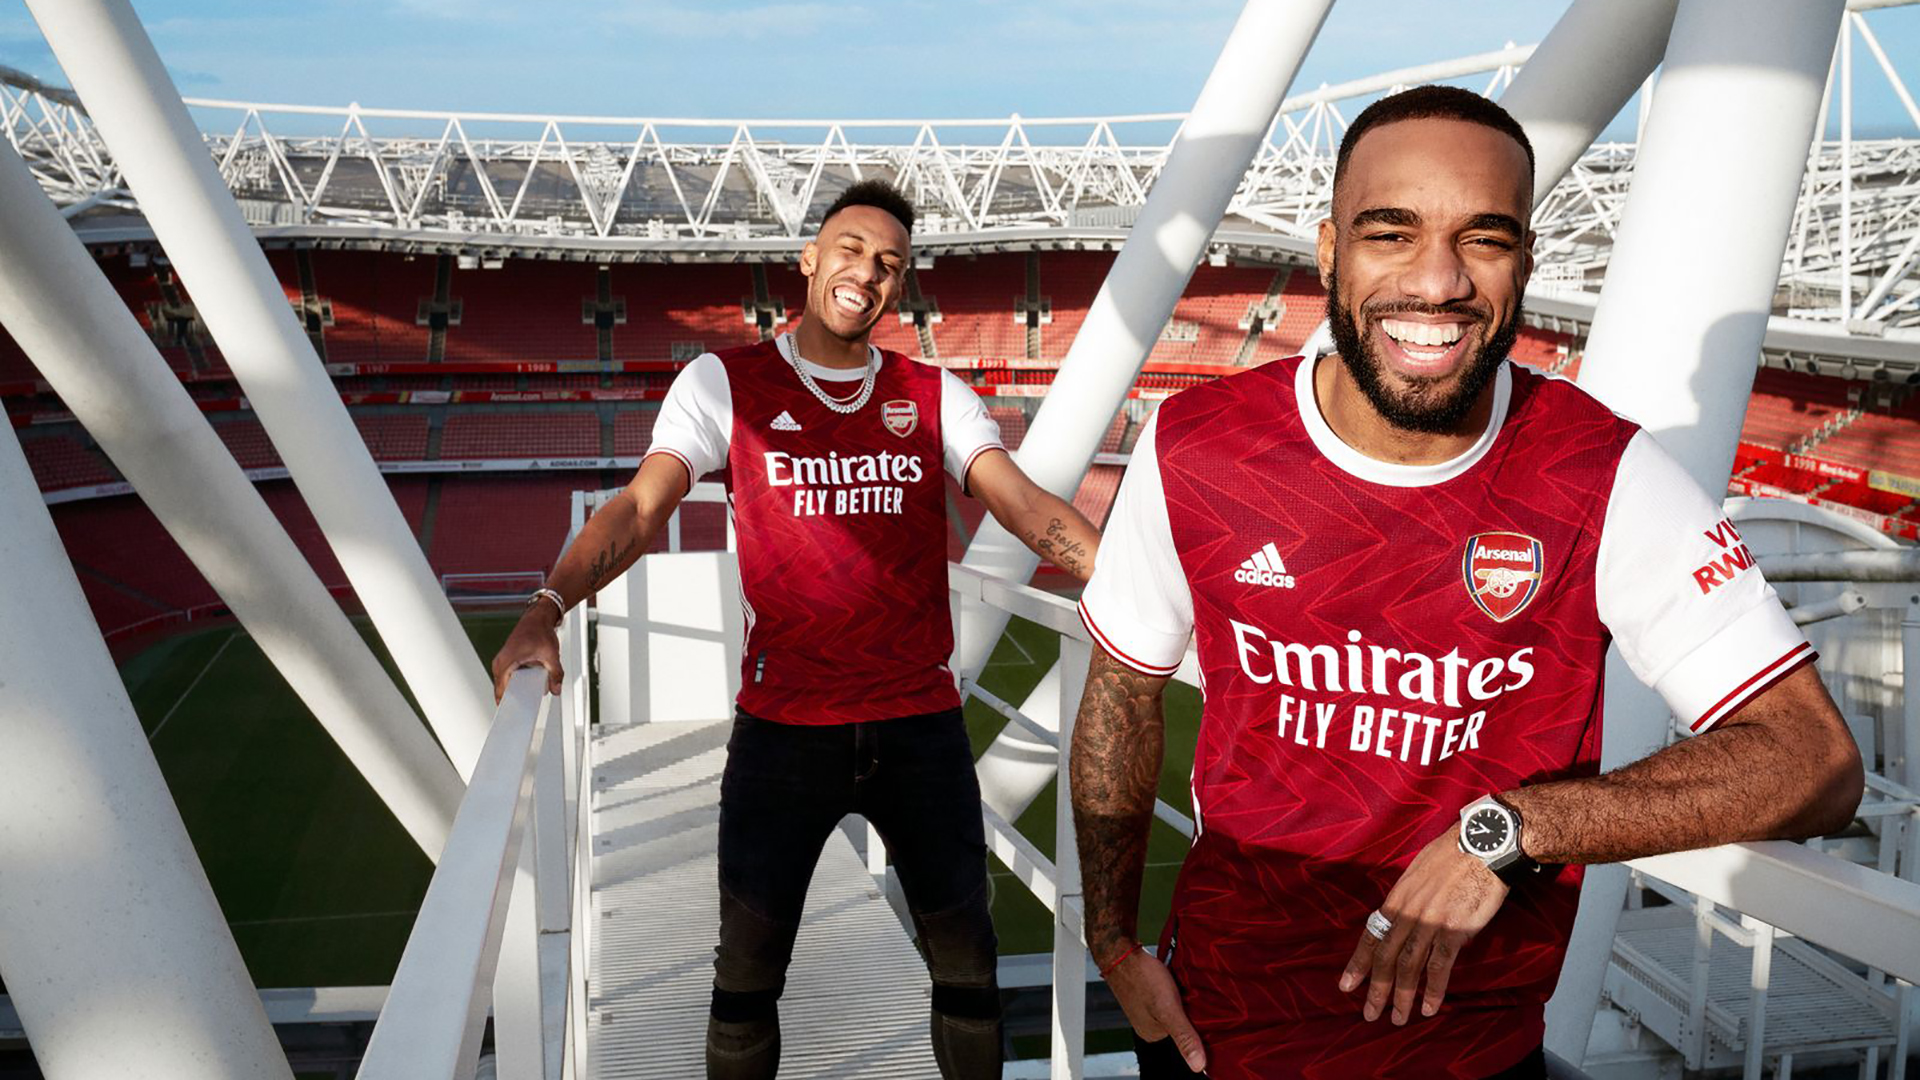 Arsenal S 2020 21 Kit New Home And Away Jersey Styles And Release Dates Goal Com